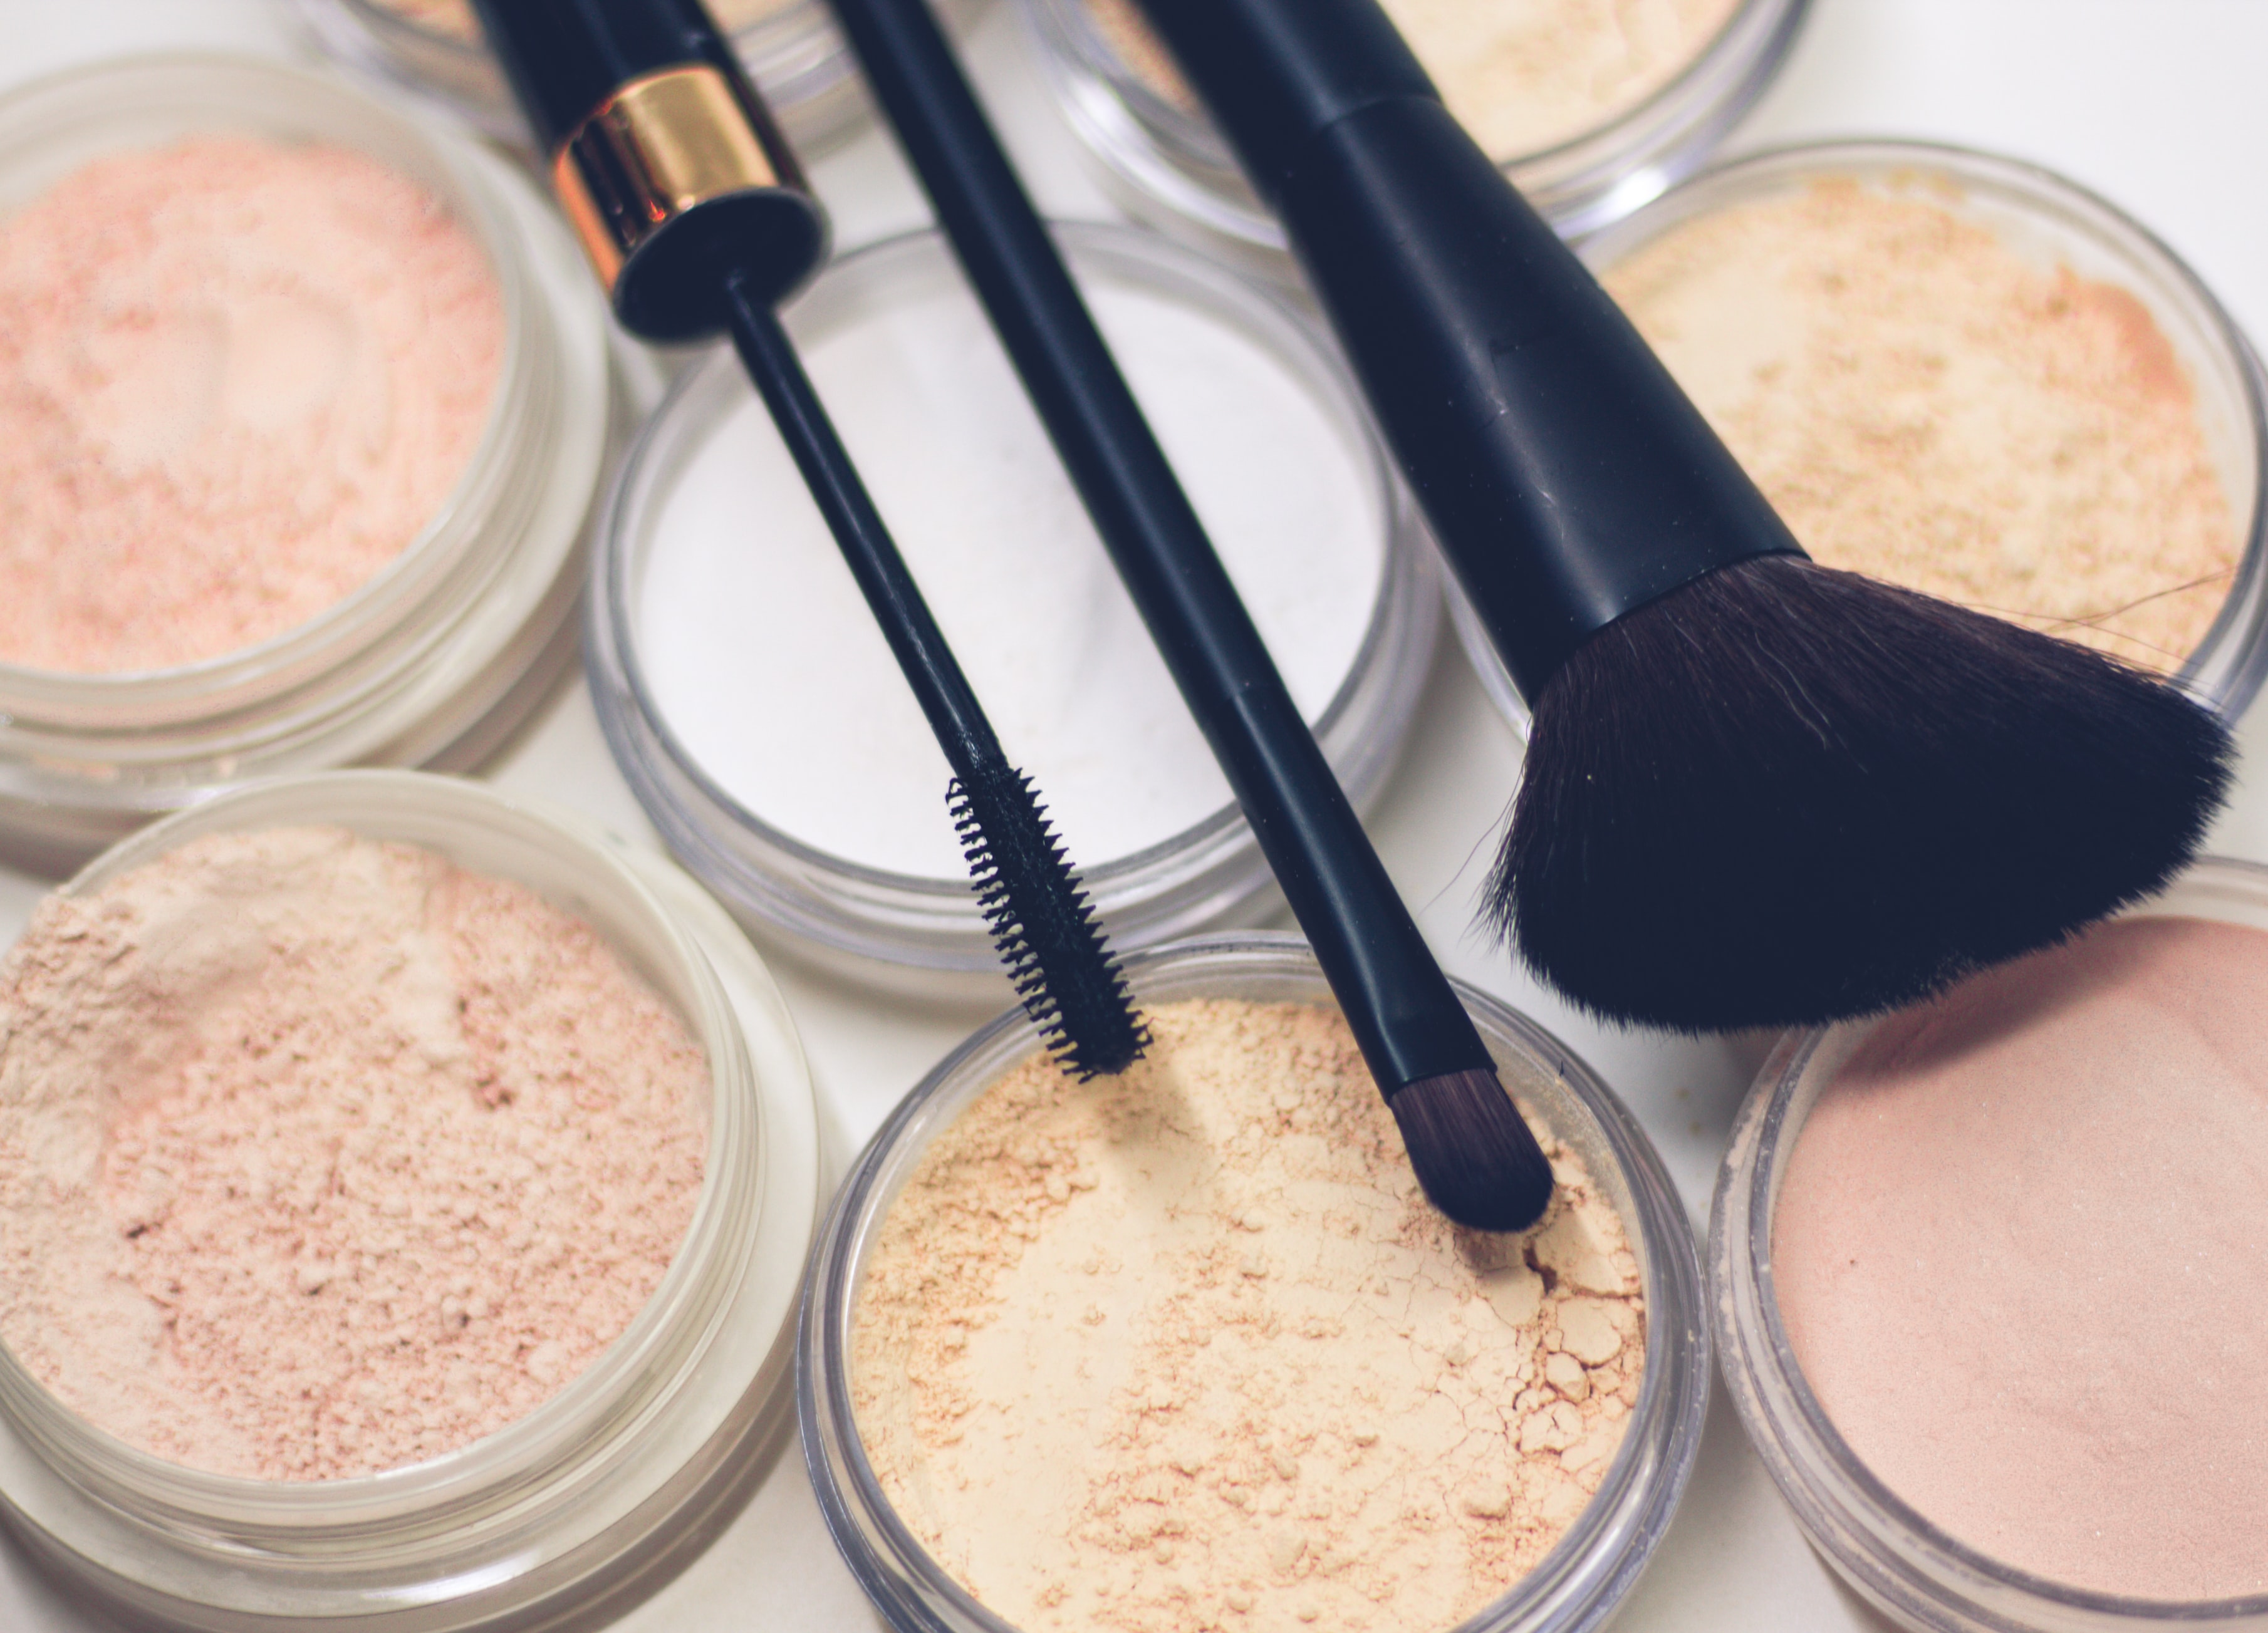 It’s Time to Declutter and Organize Your Beauty Kit